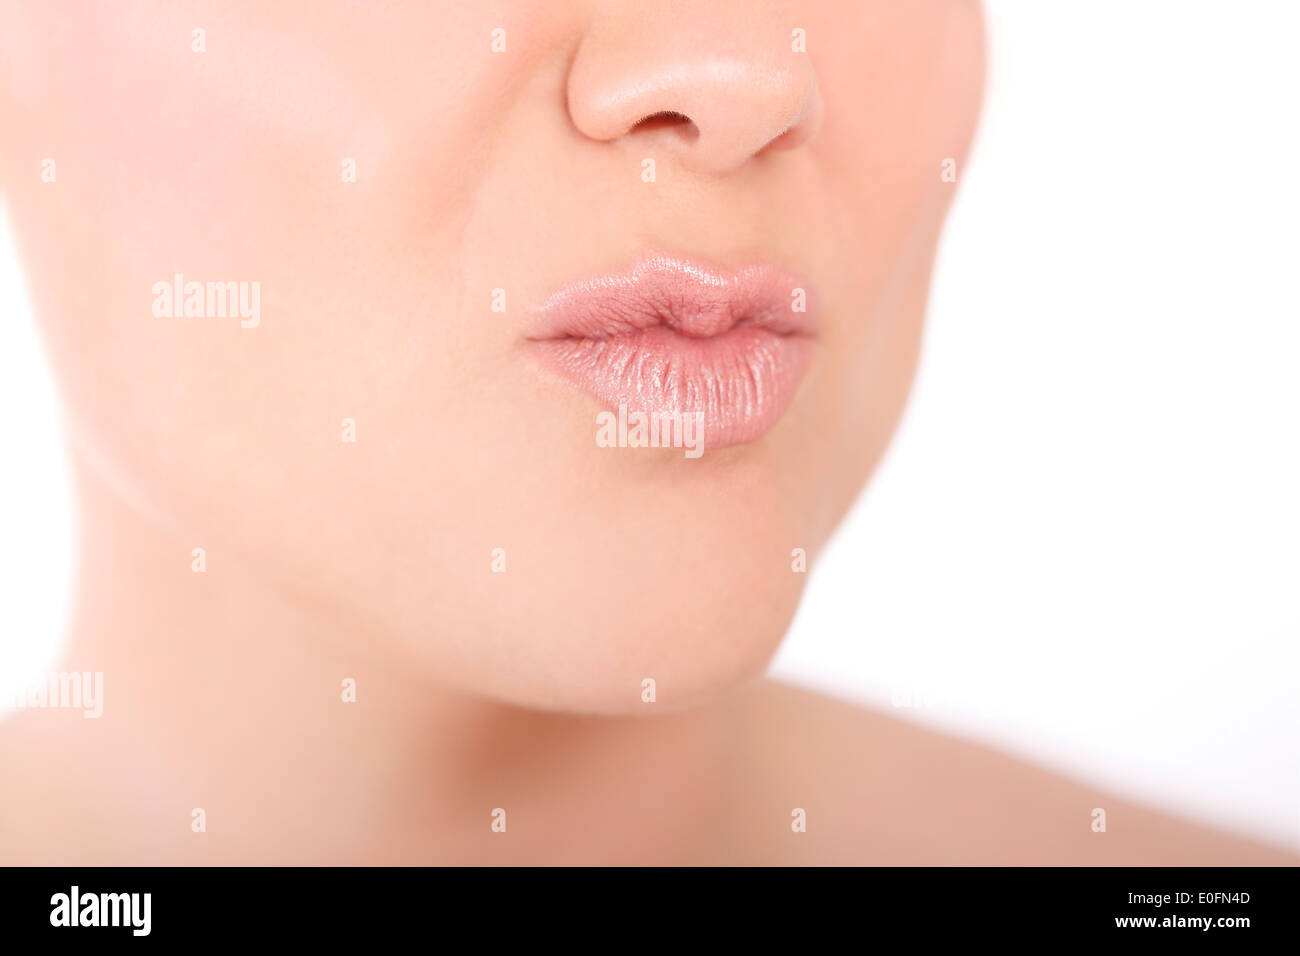 Close-up lips of a young woman Stock Photo